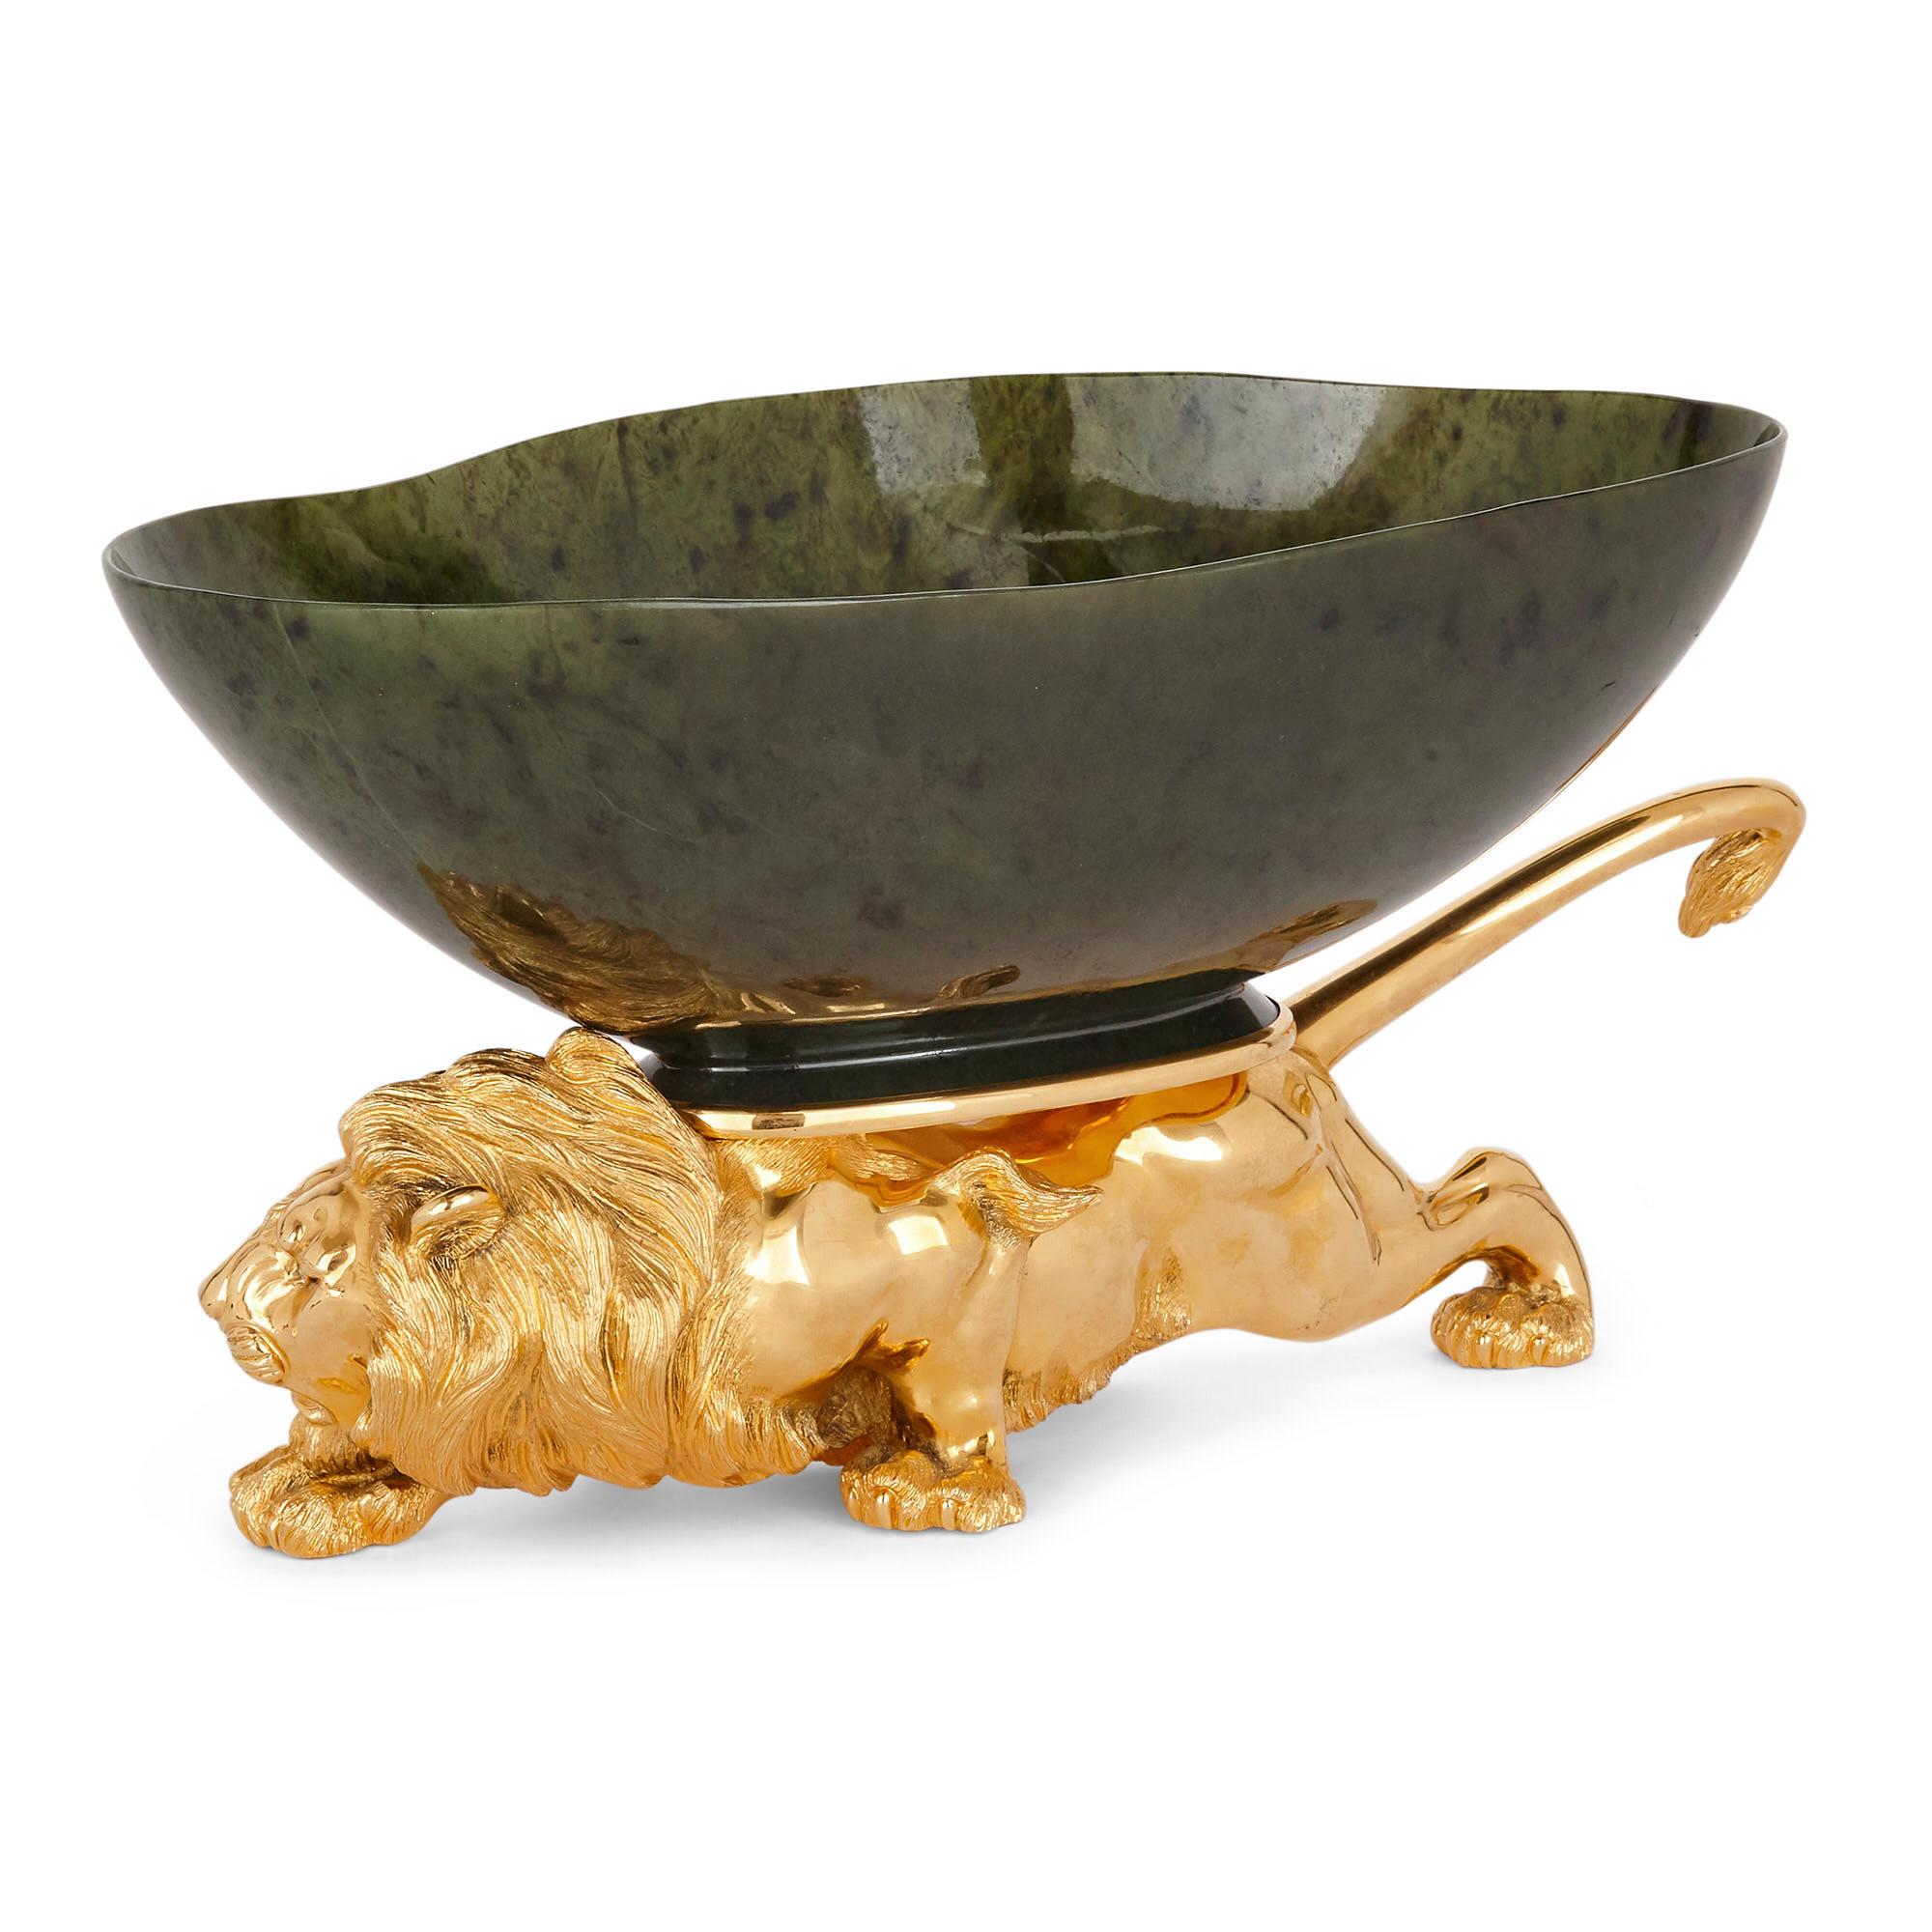 European 20th Century Silver-Gilt and Nephrite Crouching Lion Decorative Bowl For Sale